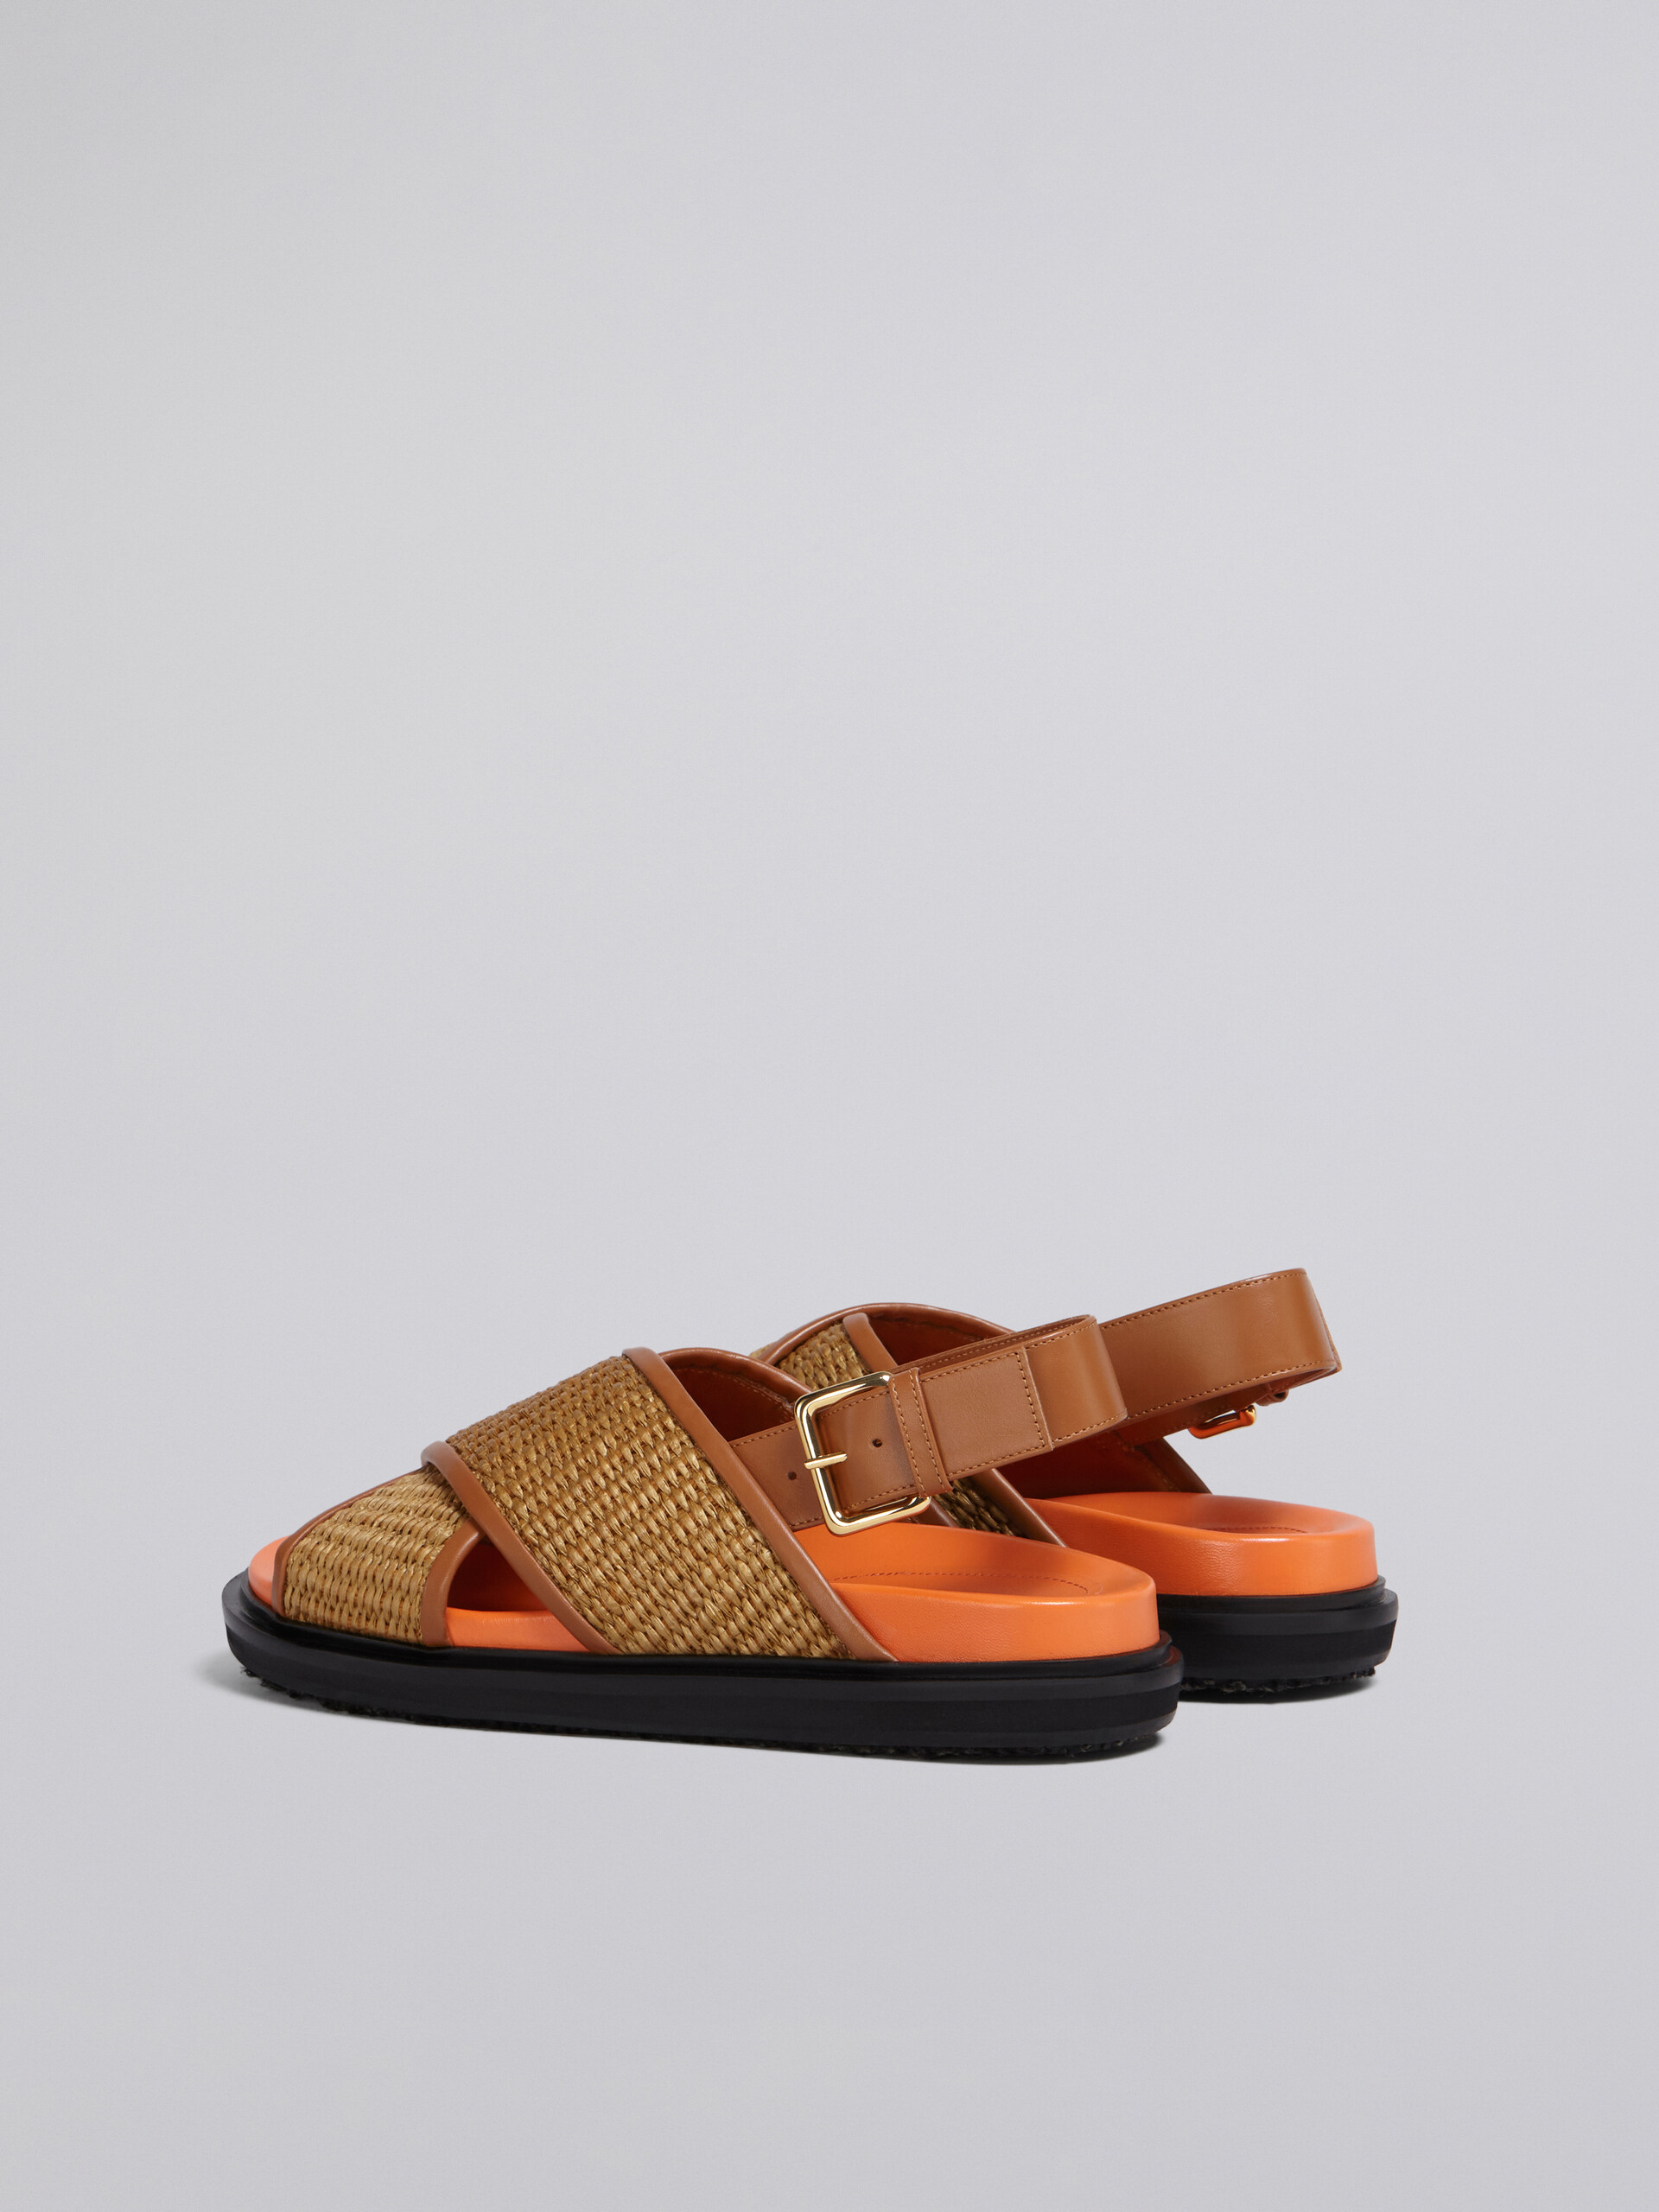 Brown raffia and leather fussbett - Sandals - Image 3